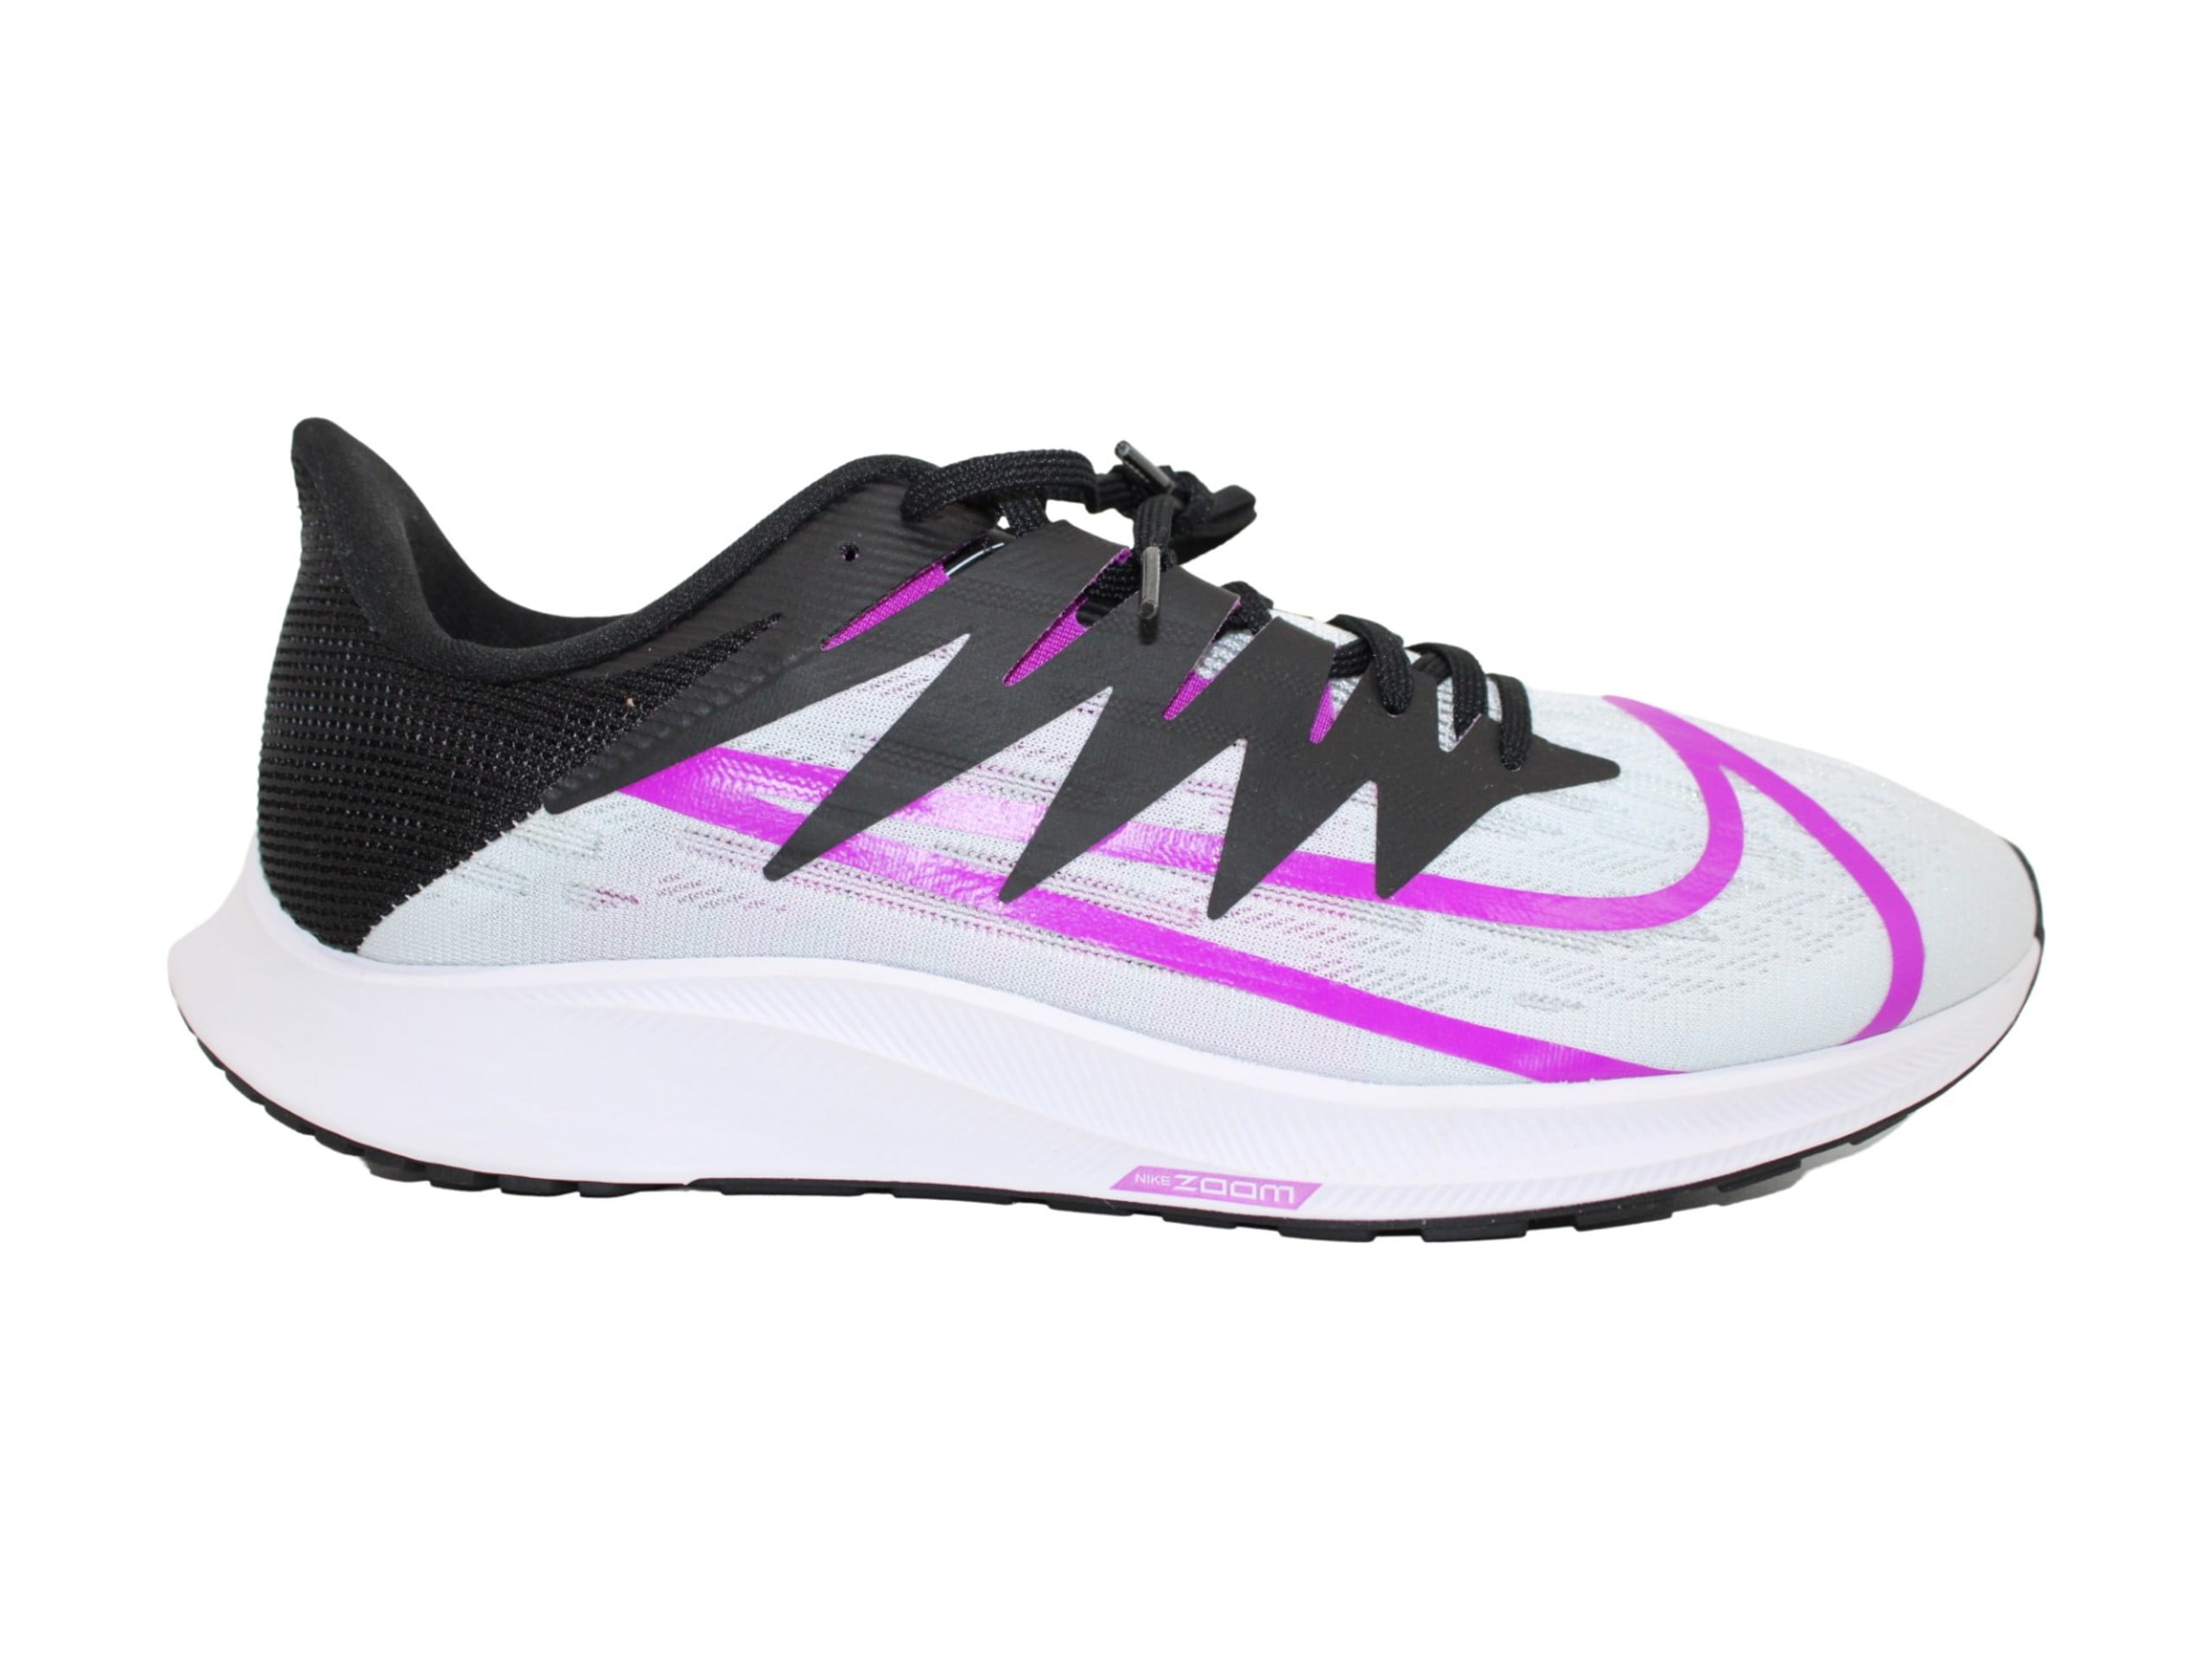 Nike Zoom Rival Fly Men's Running Shoes, Pure MultiColor, Size 10.0 - Walmart.com